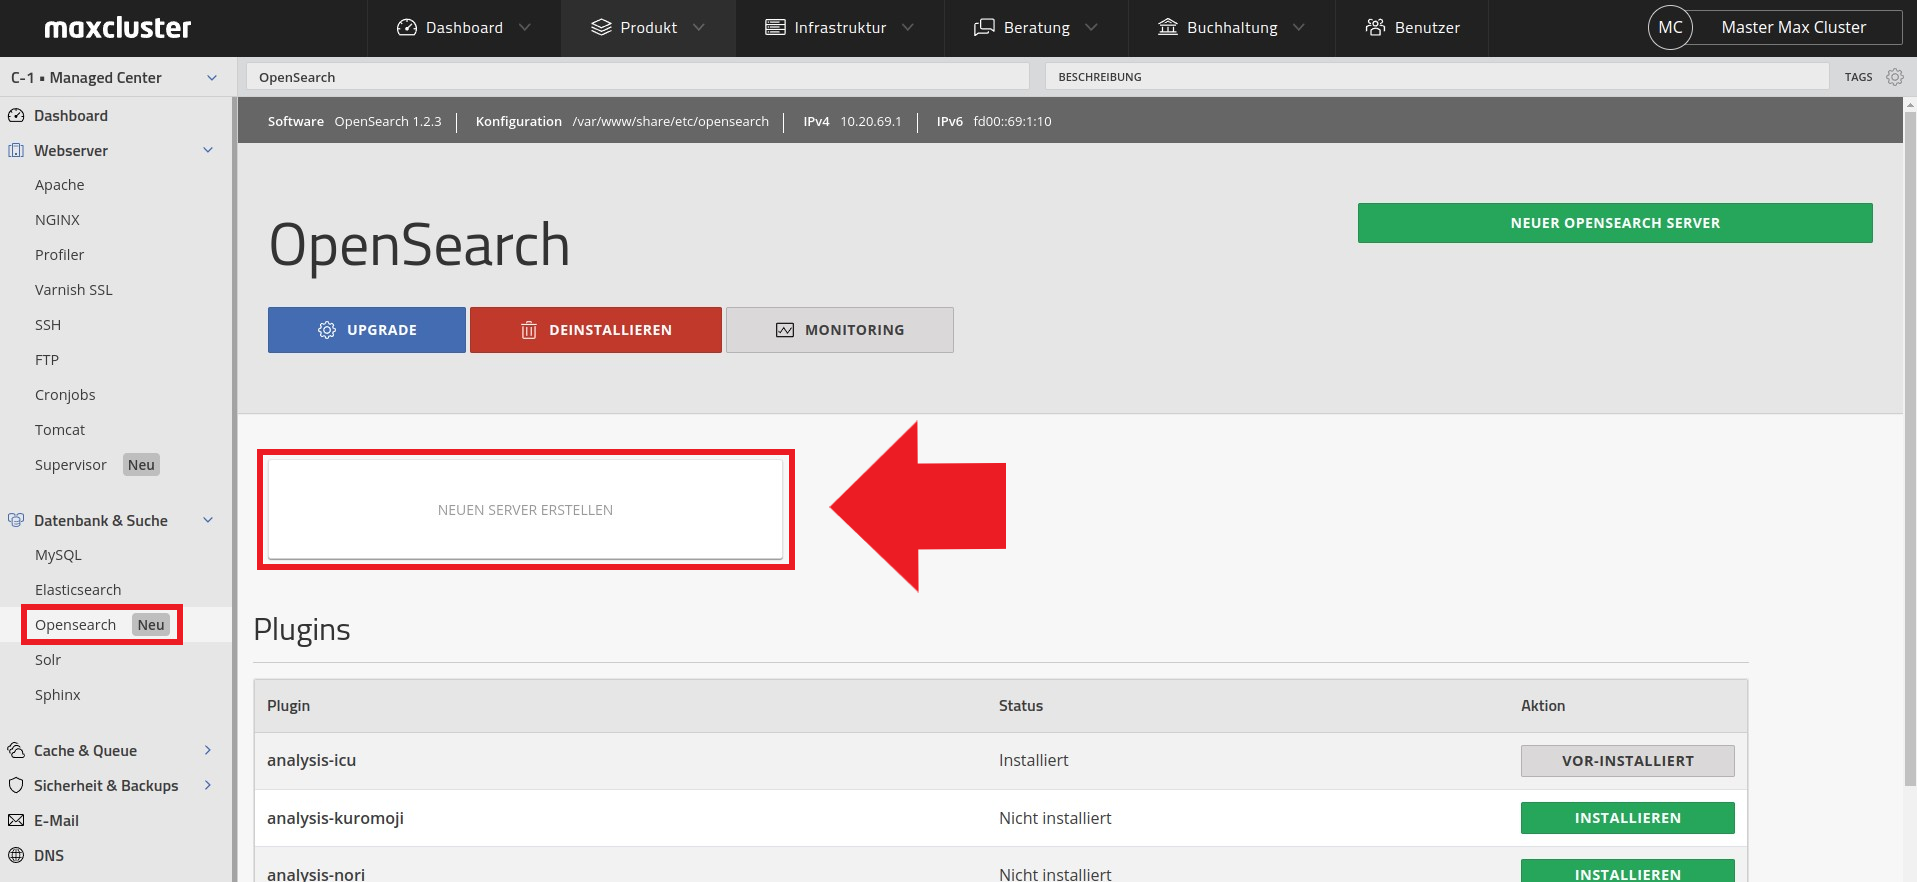 Step 1: OpenSearch via the navigation and click on the button "Create new server"